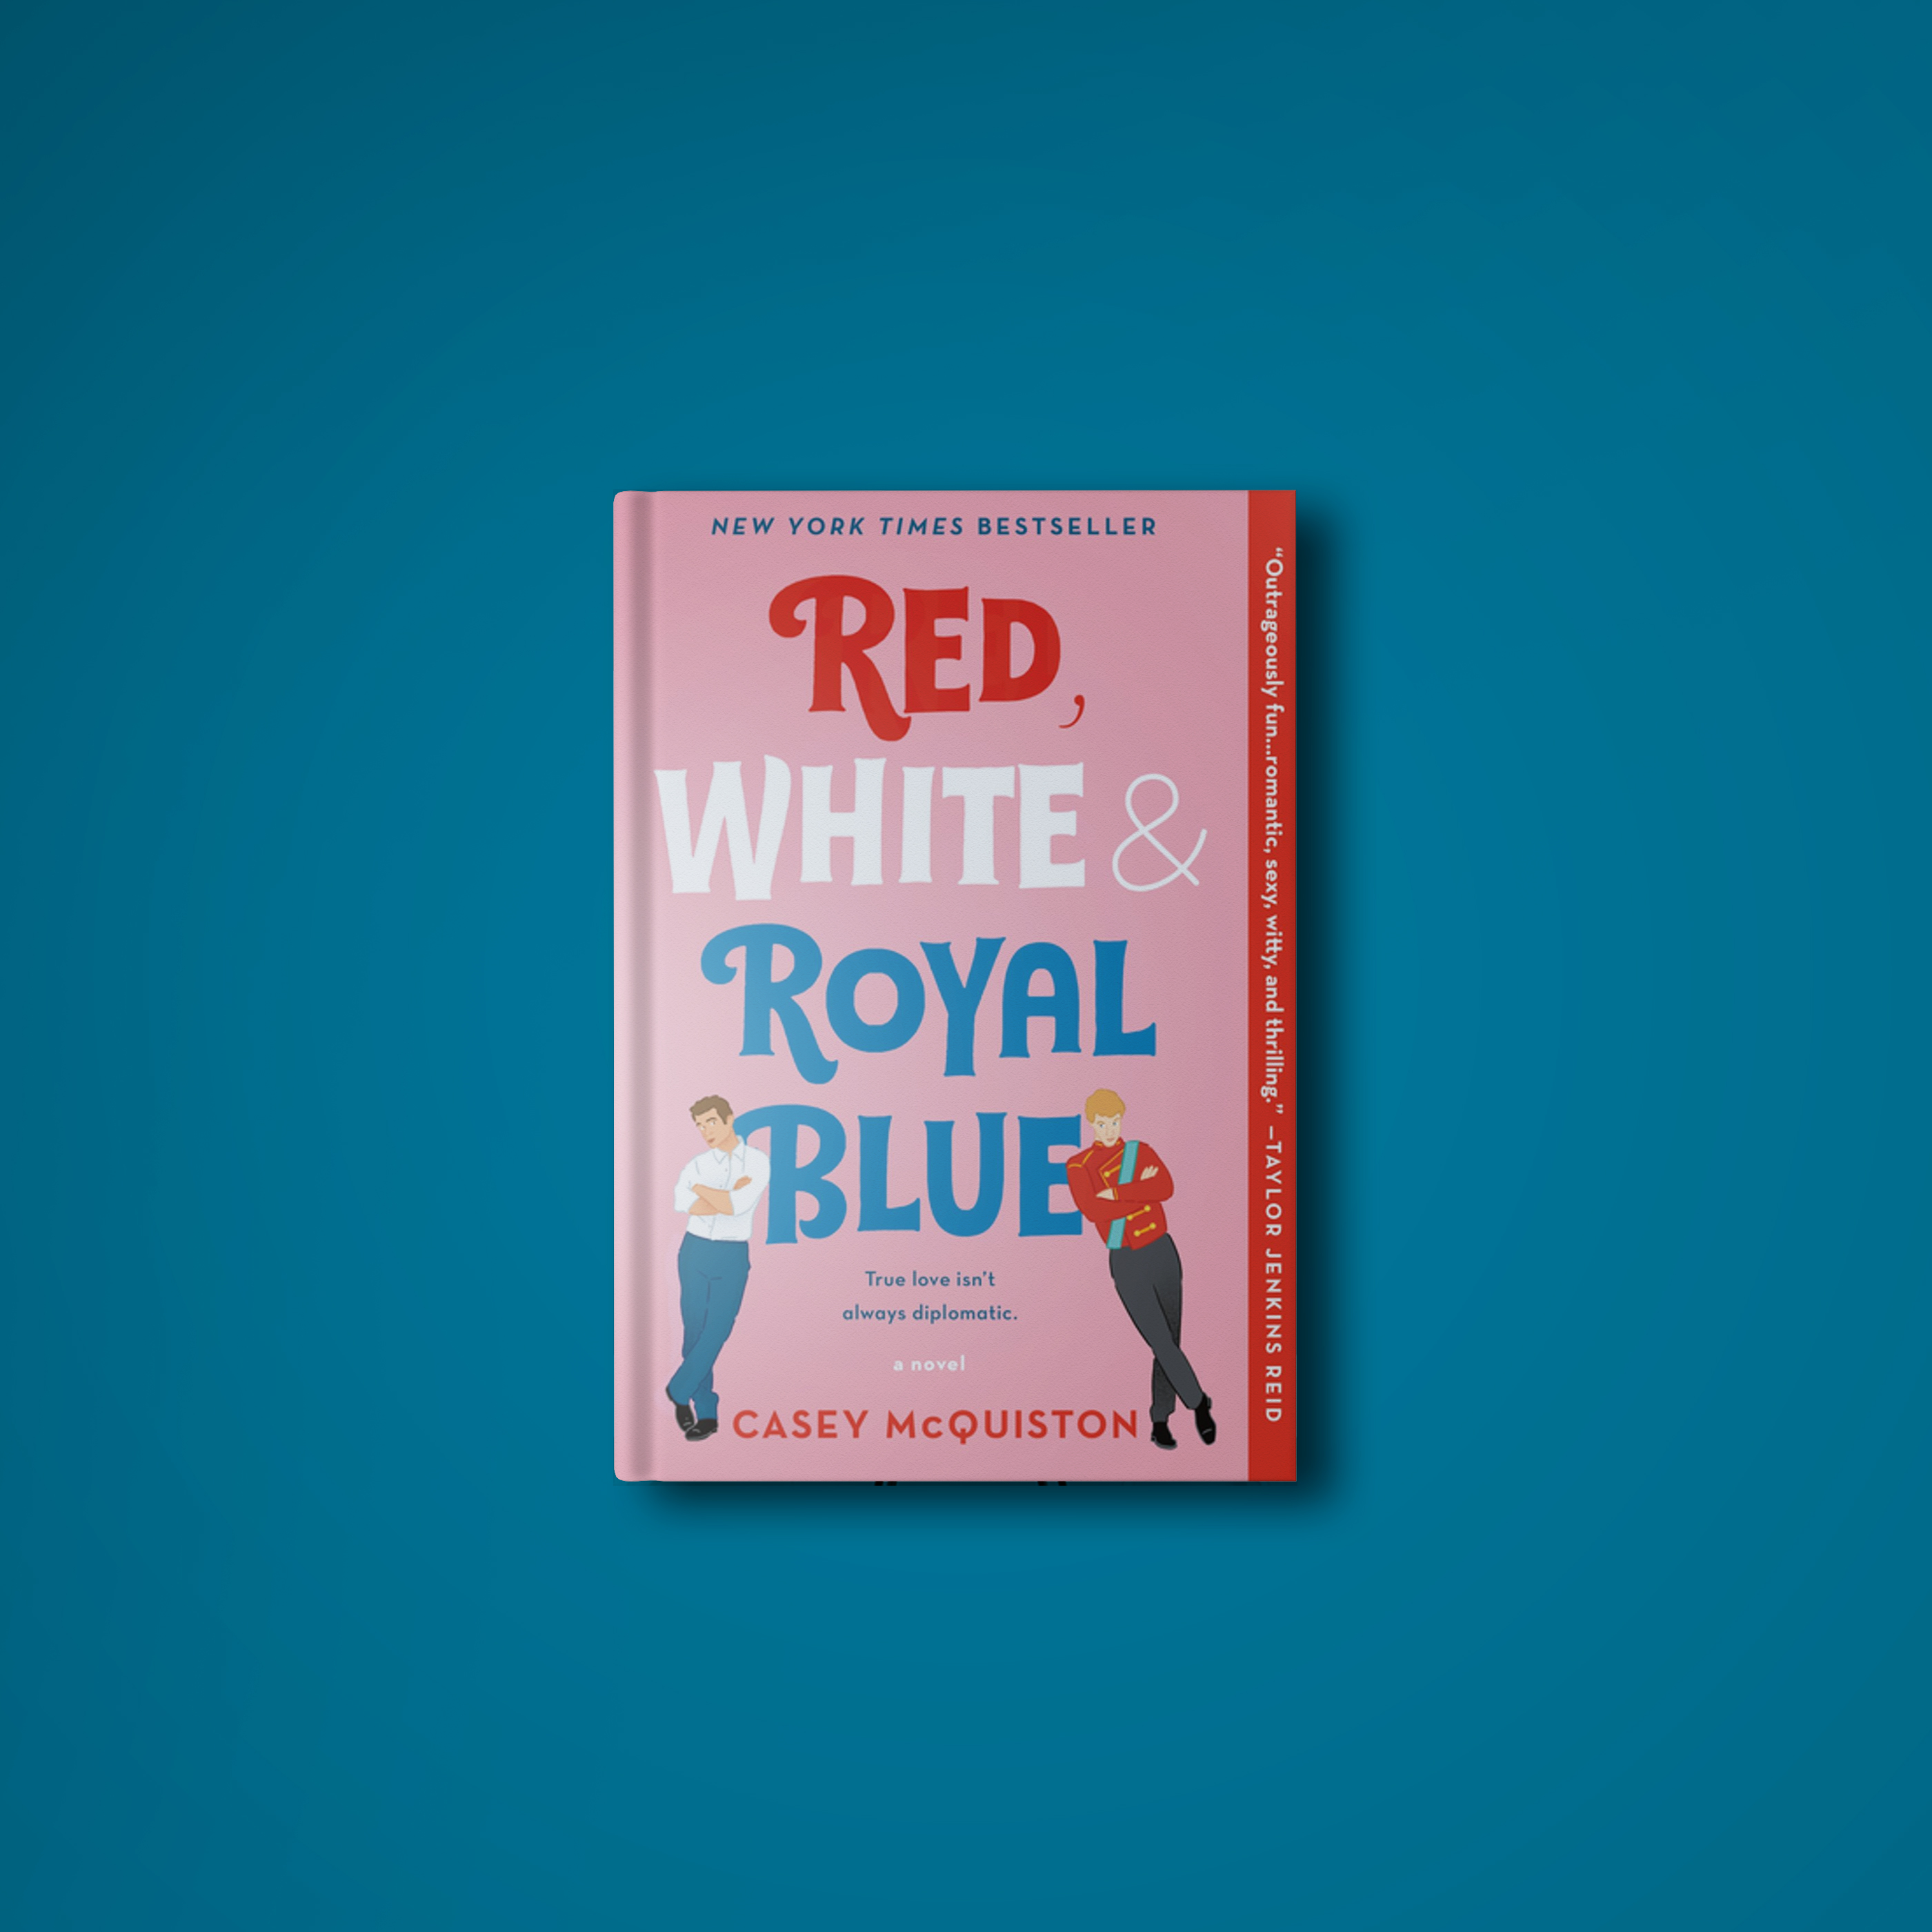 At one year old, ‘Red, White & Royal Blue’ feels like a relic of a different time, but what it